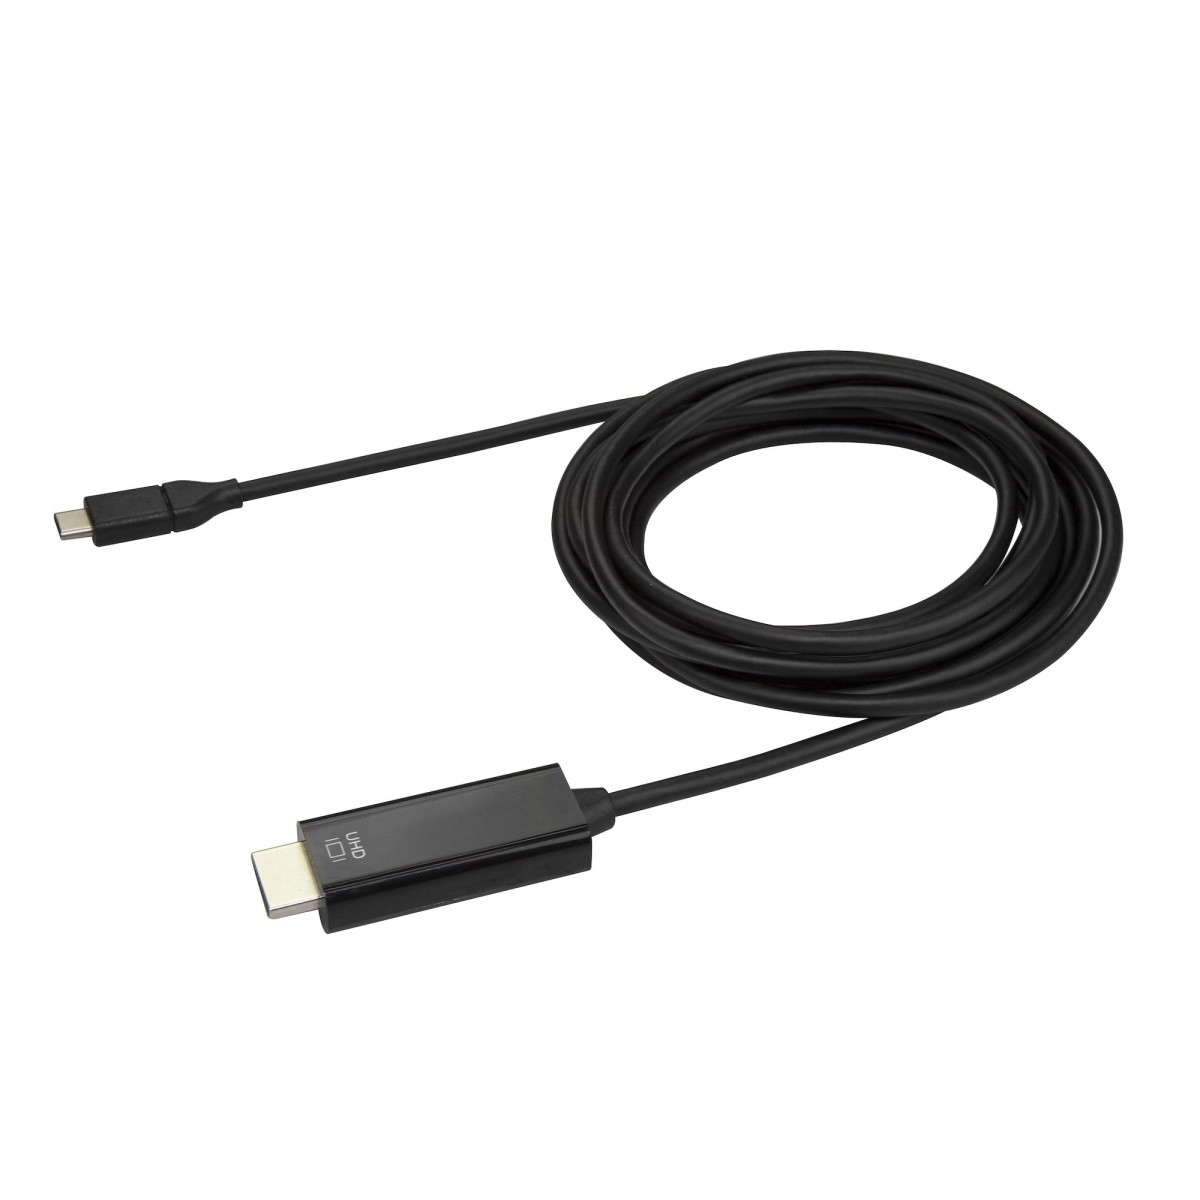 Cable USB C to HDMI 3m 4K60Hz - Black